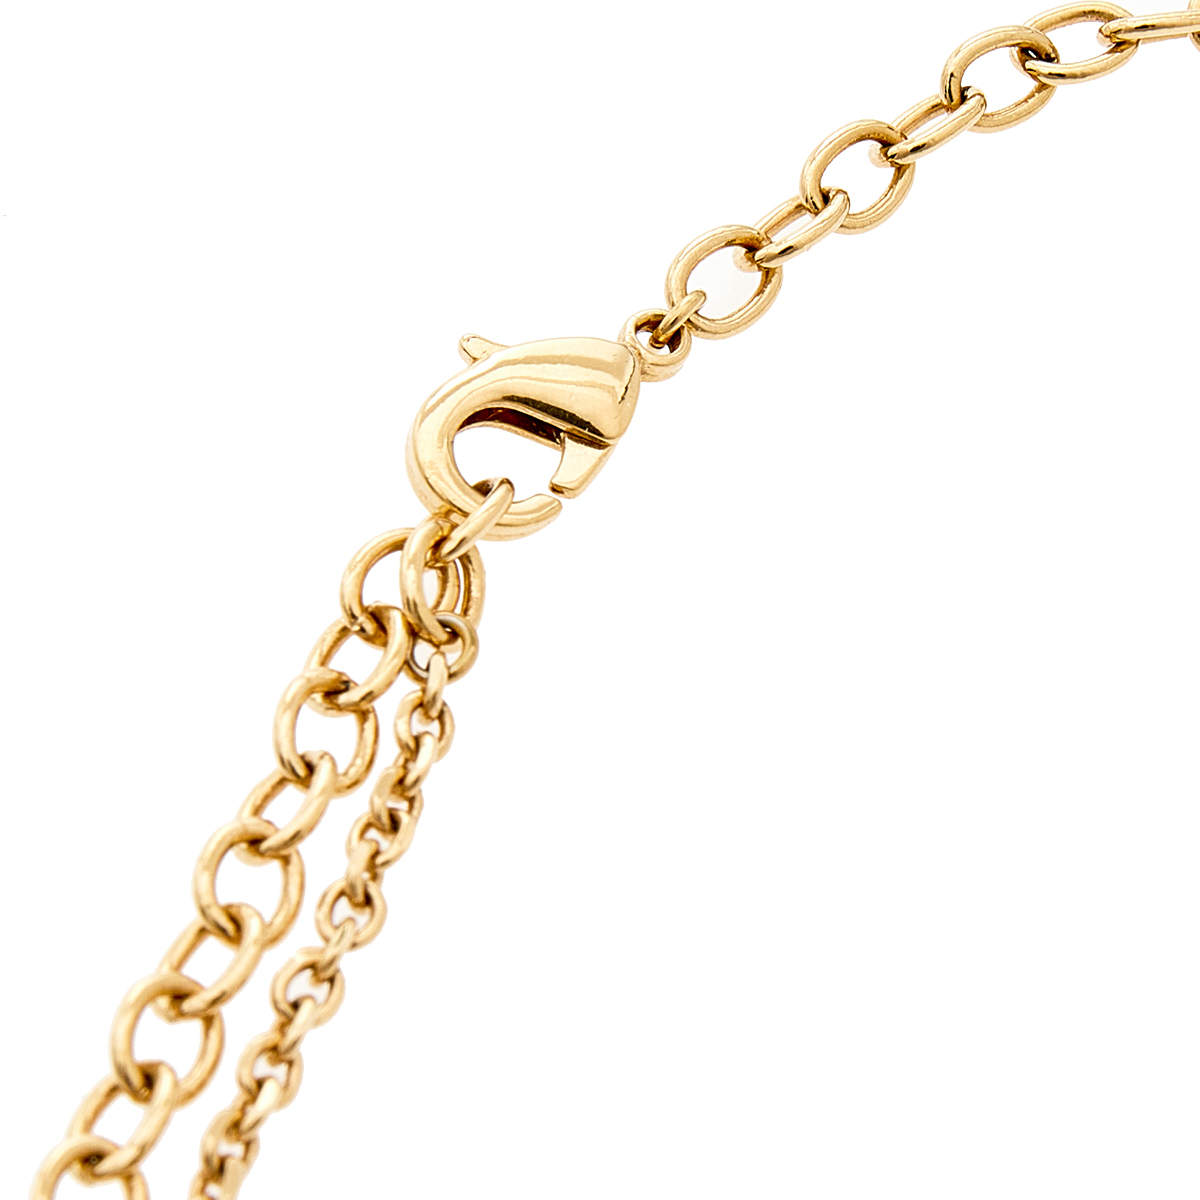 Louis Vuitton Blooming Supple Necklace 2021-22FW, Gold